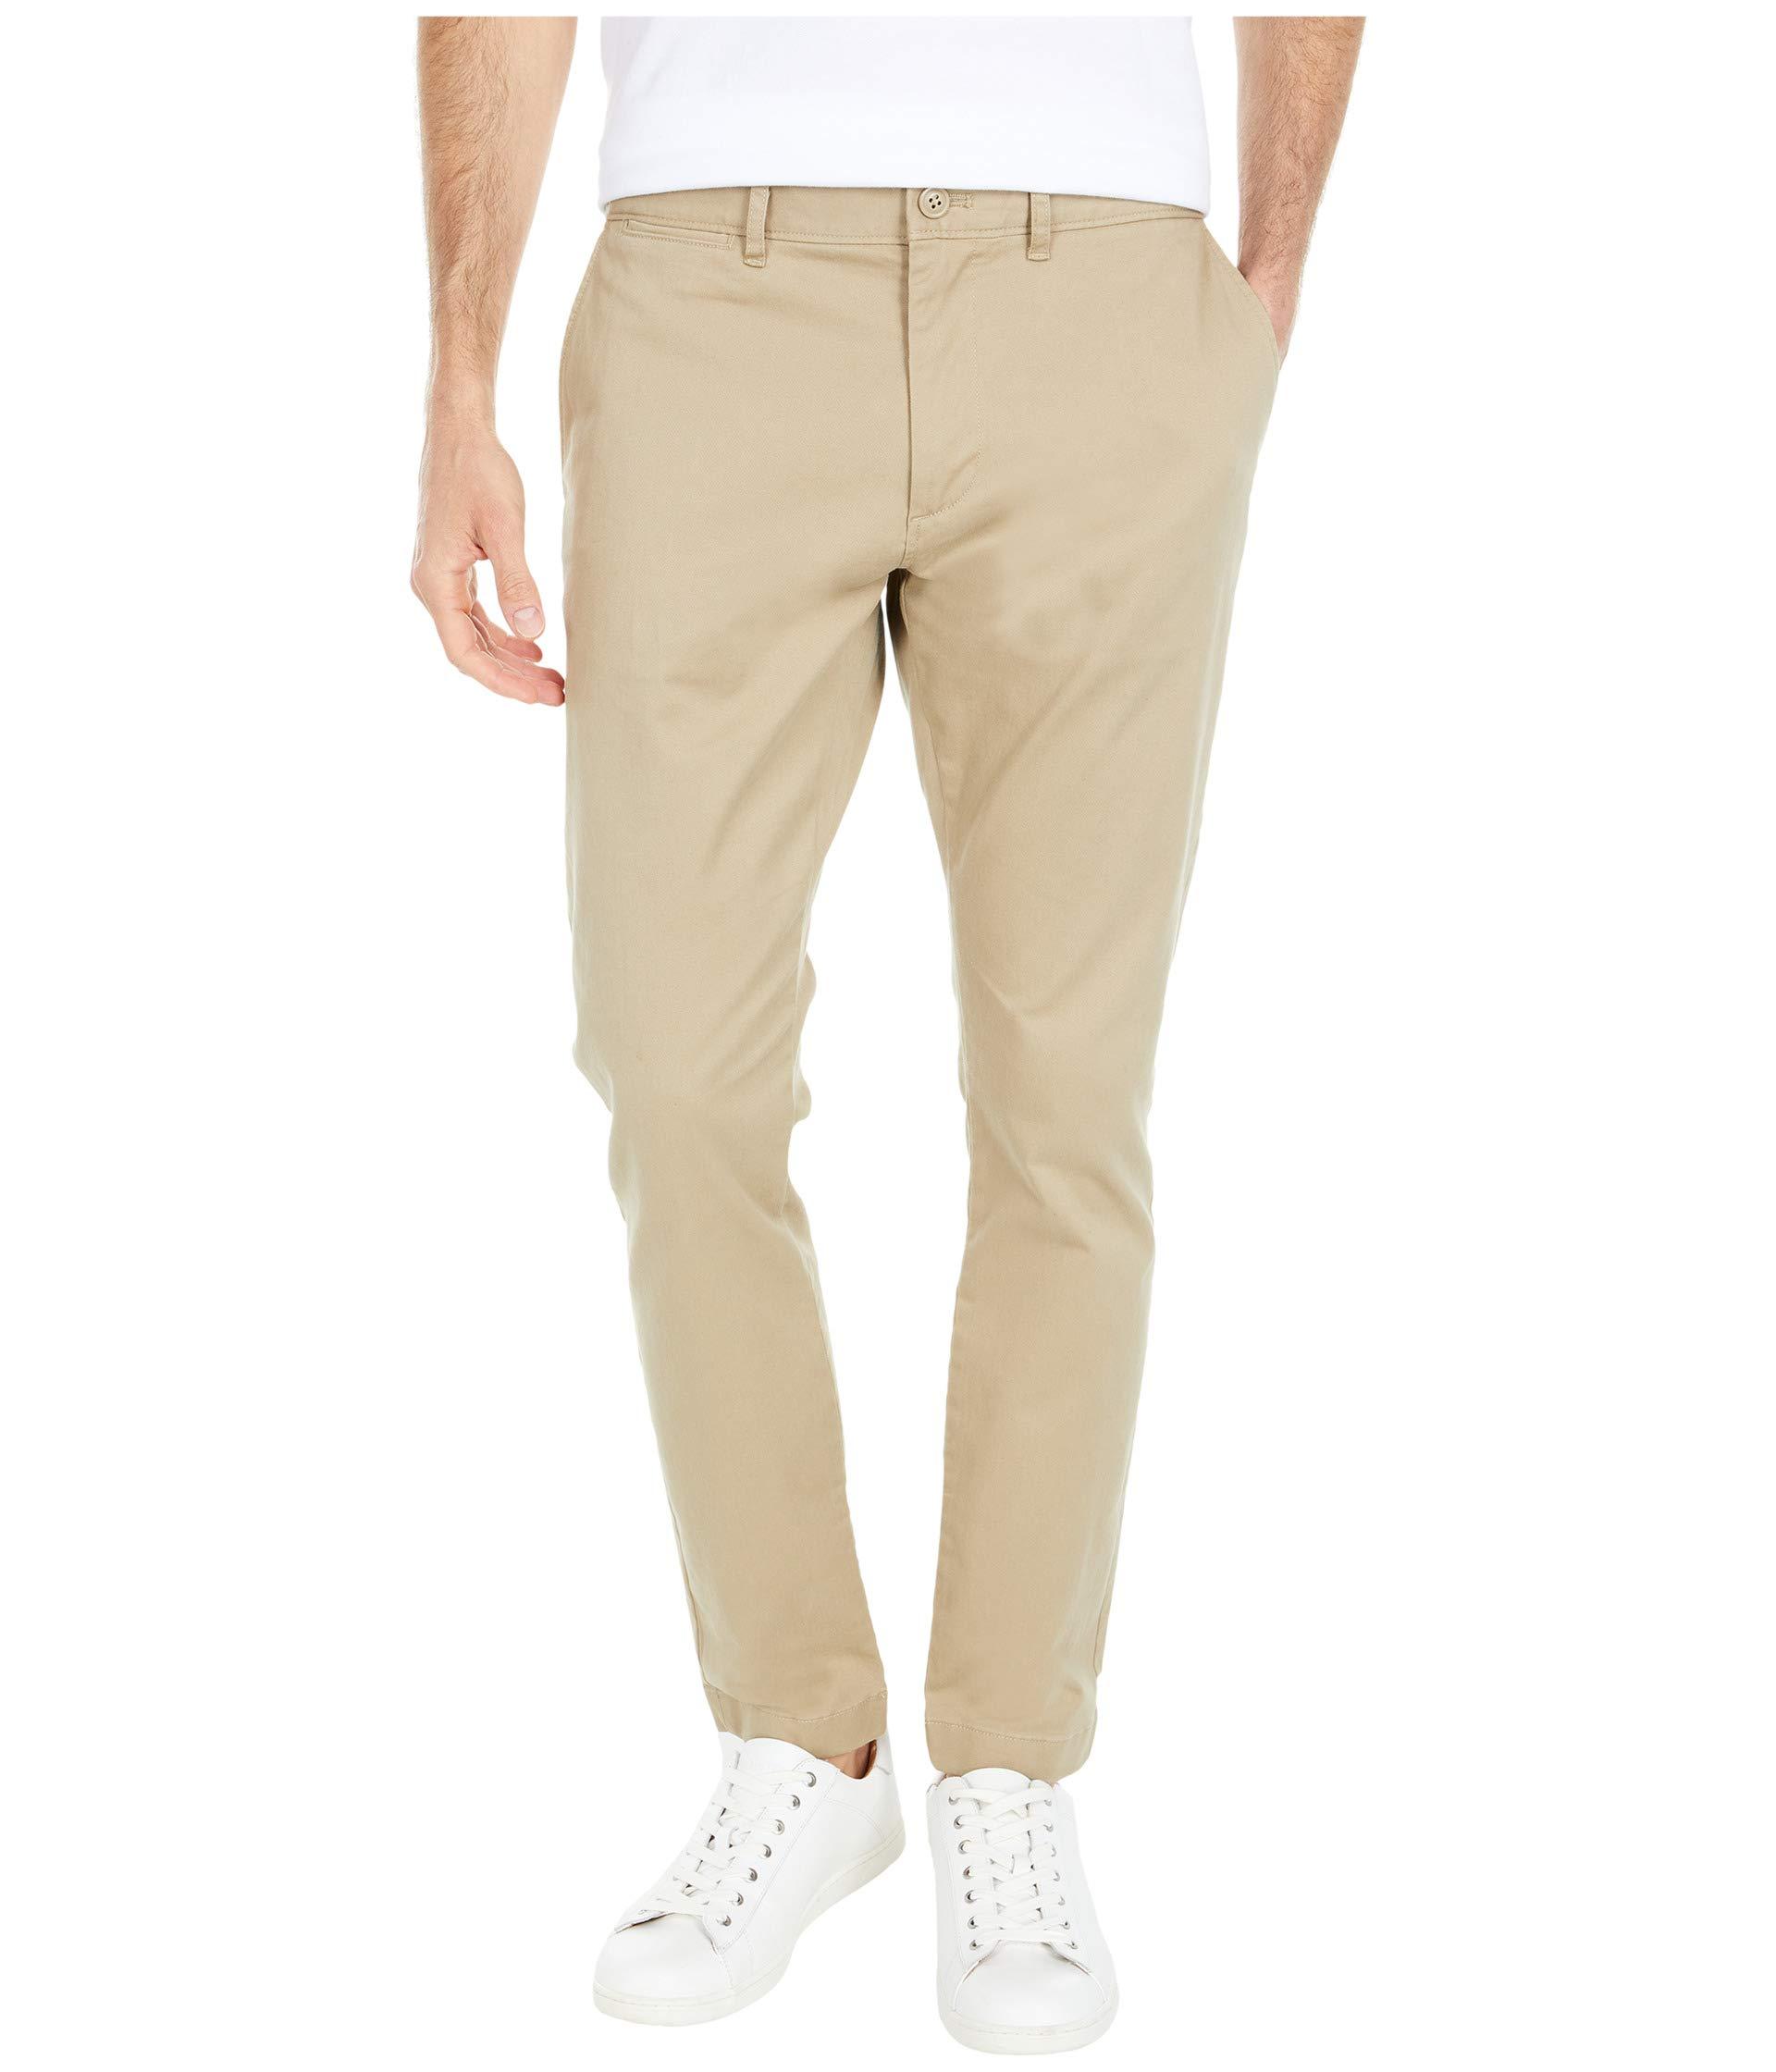 J.Crew Cotton Skinny Stretch Chino in Khaki (Natural) for Men - Lyst